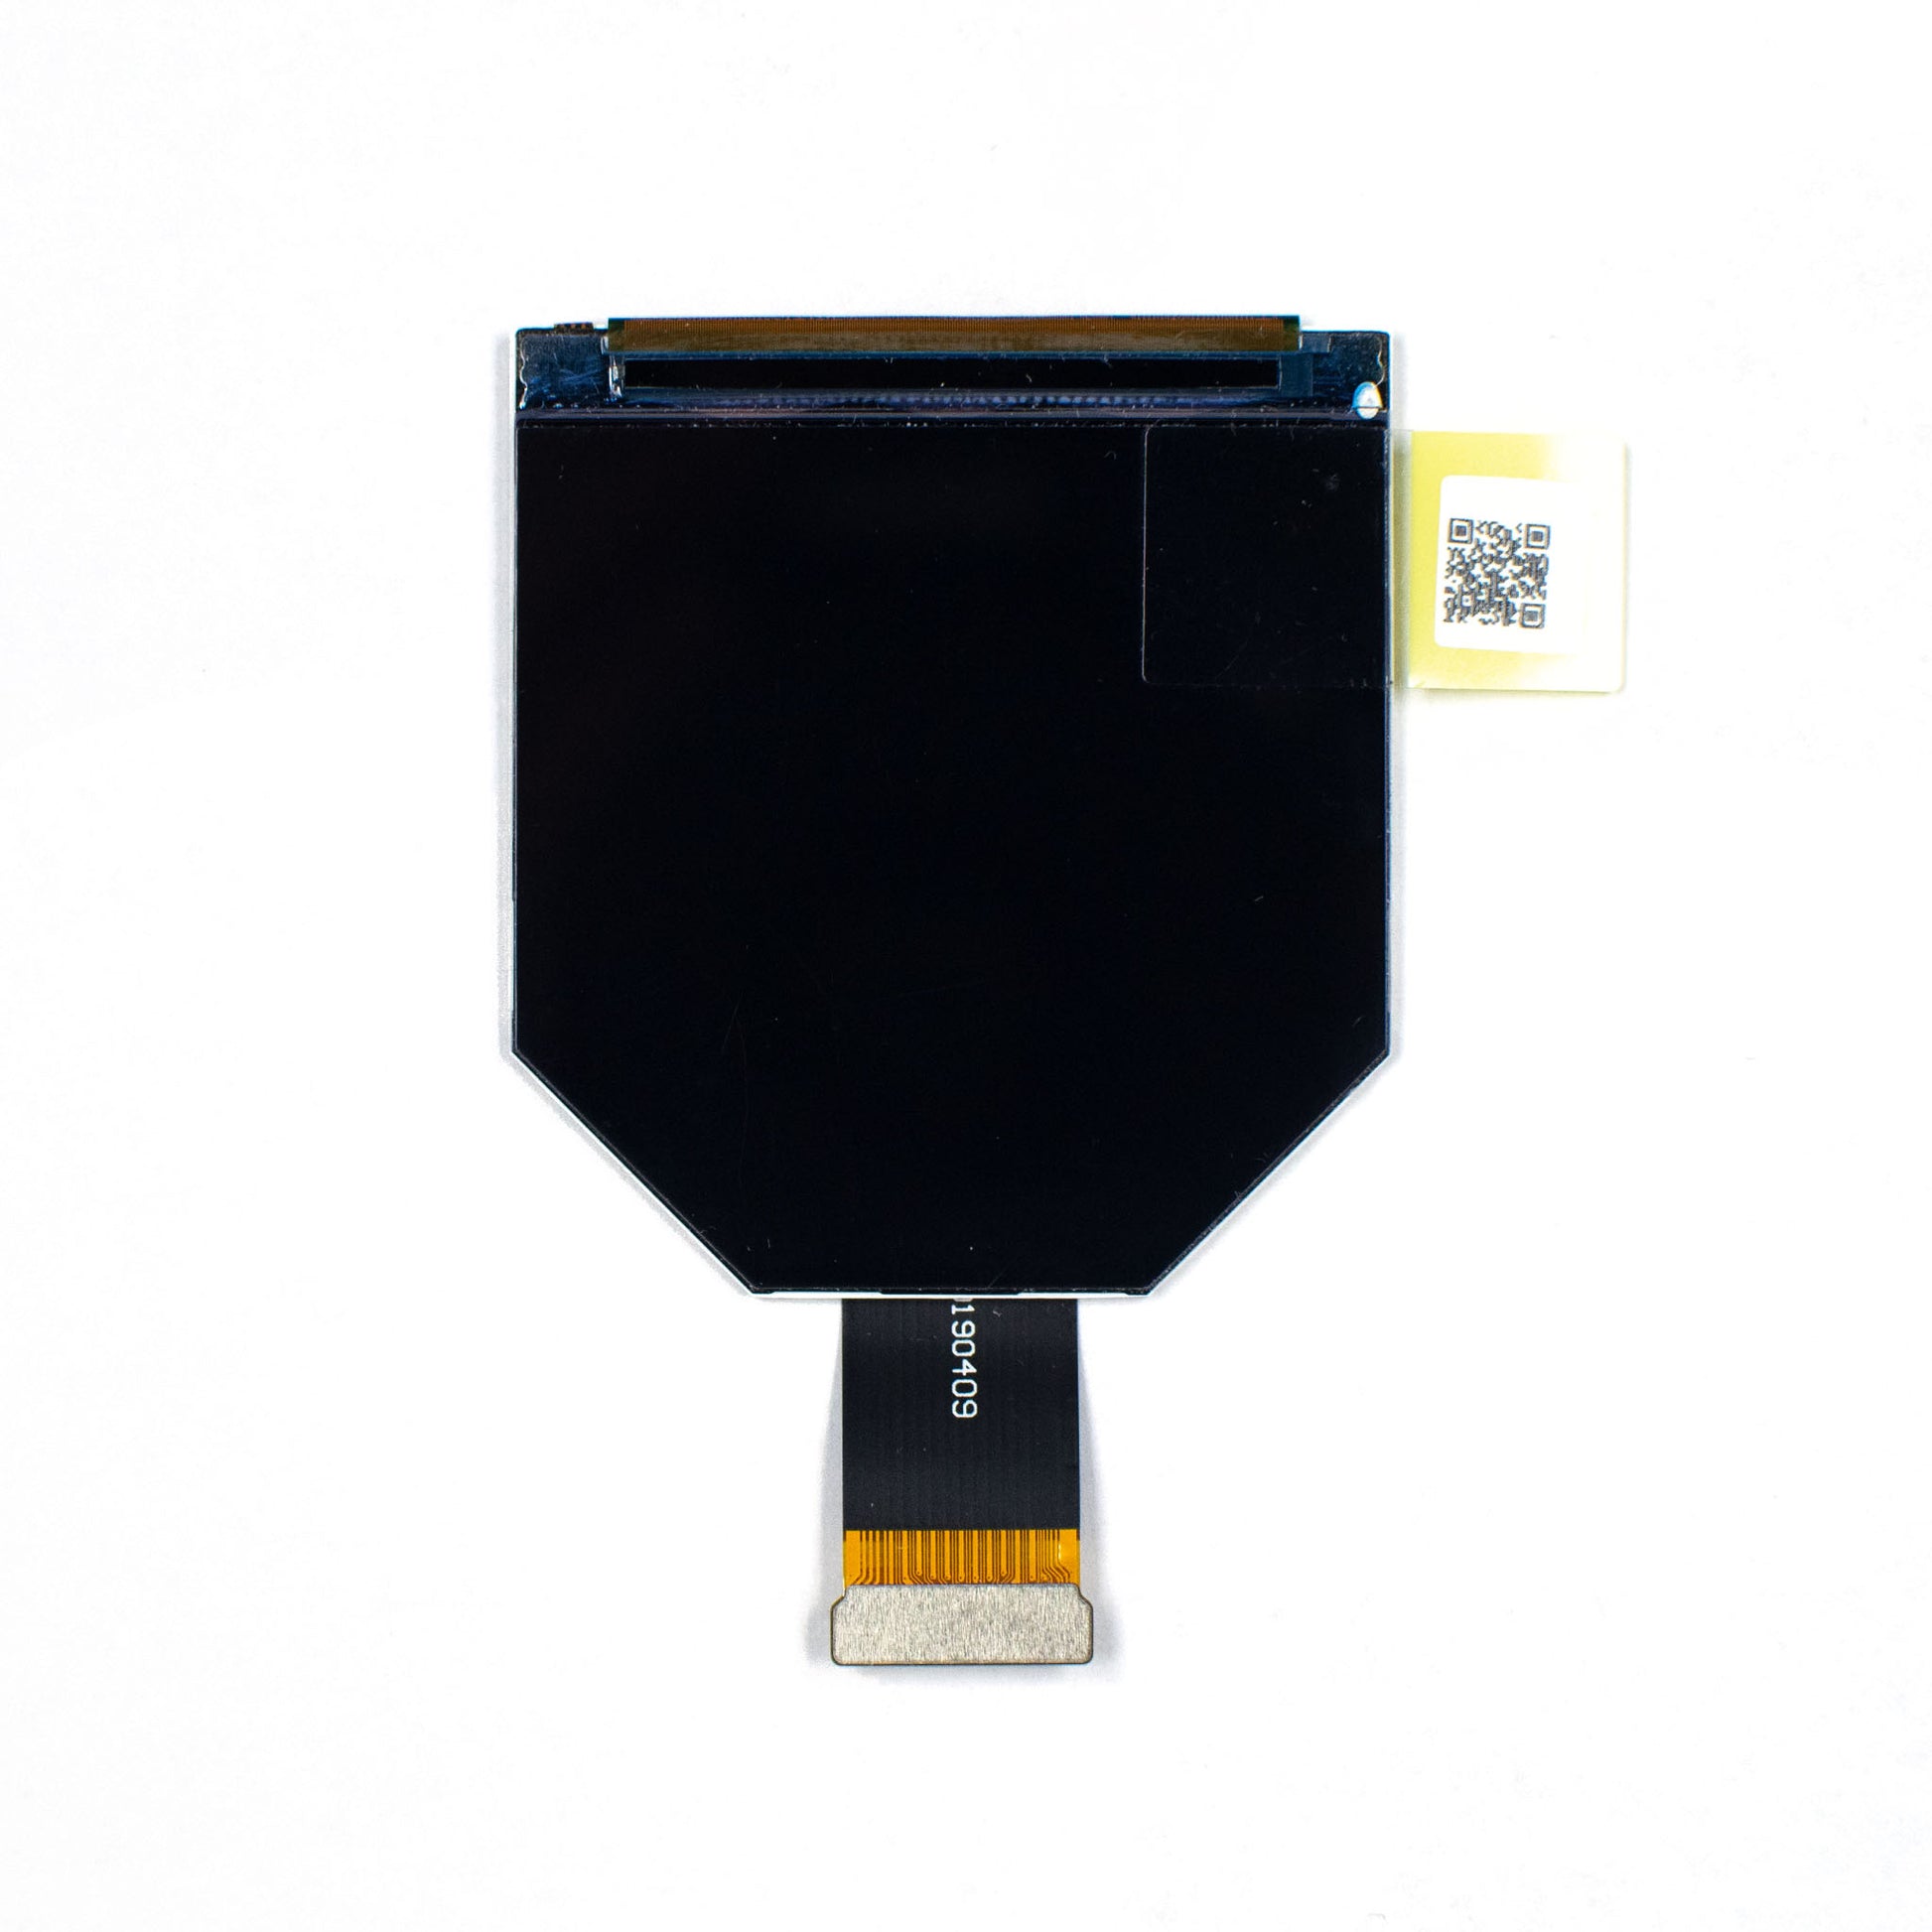 2.1 inch TFT Micro Display Panel designed for VR with 1600x1600 resolution and 1058ppi